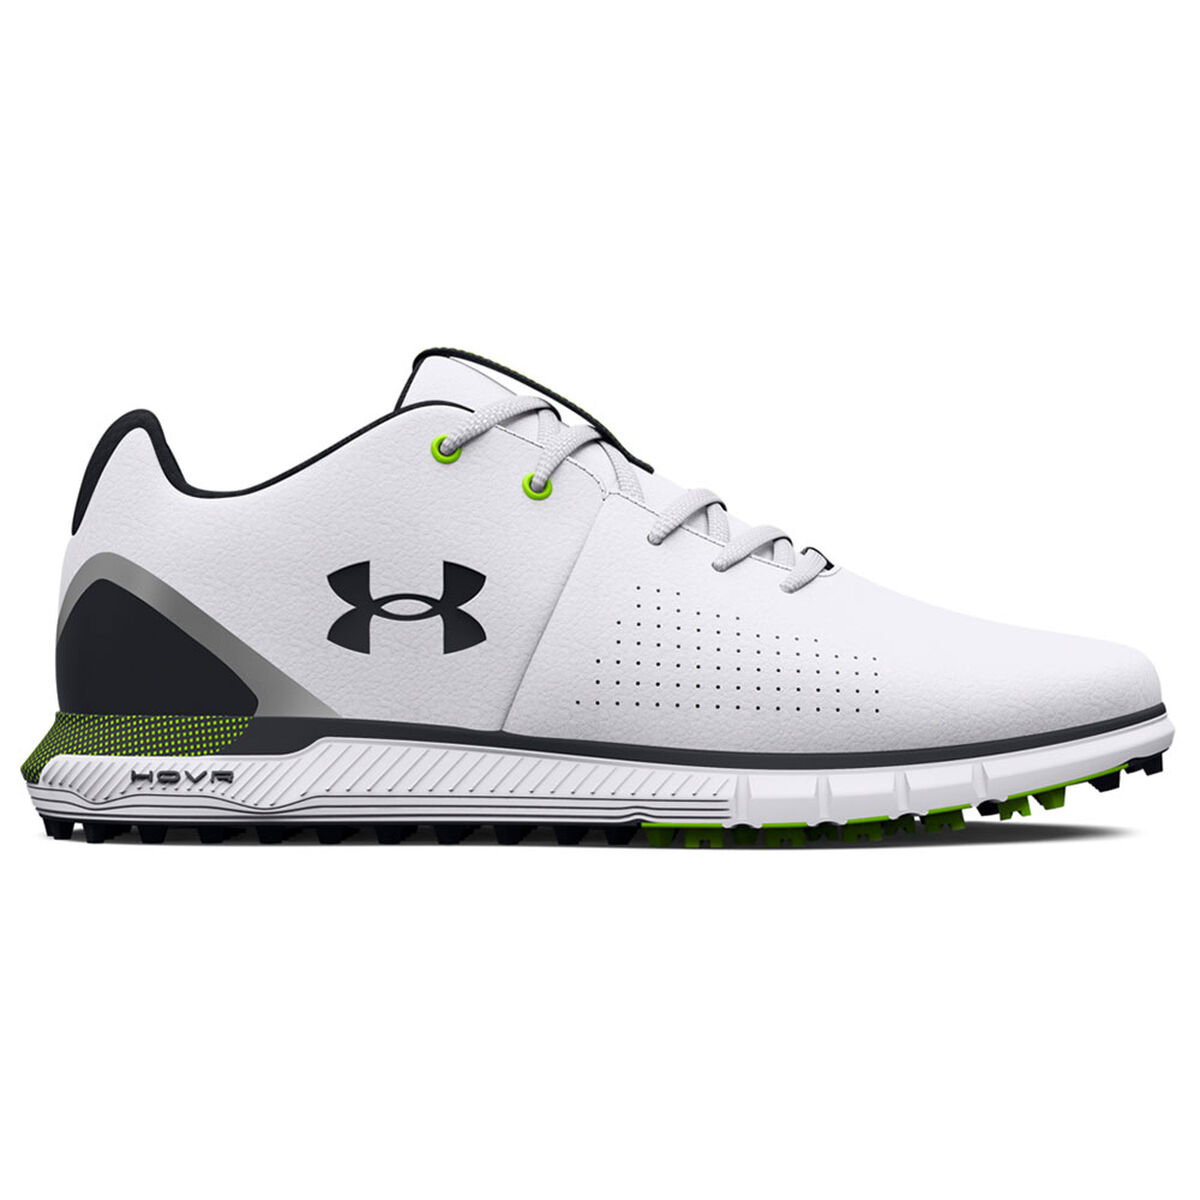 Under Armour Men’s HOVR Fade 2 Spikeless Golf Shoes, Mens, White/black/black, 7.5 | American Golf